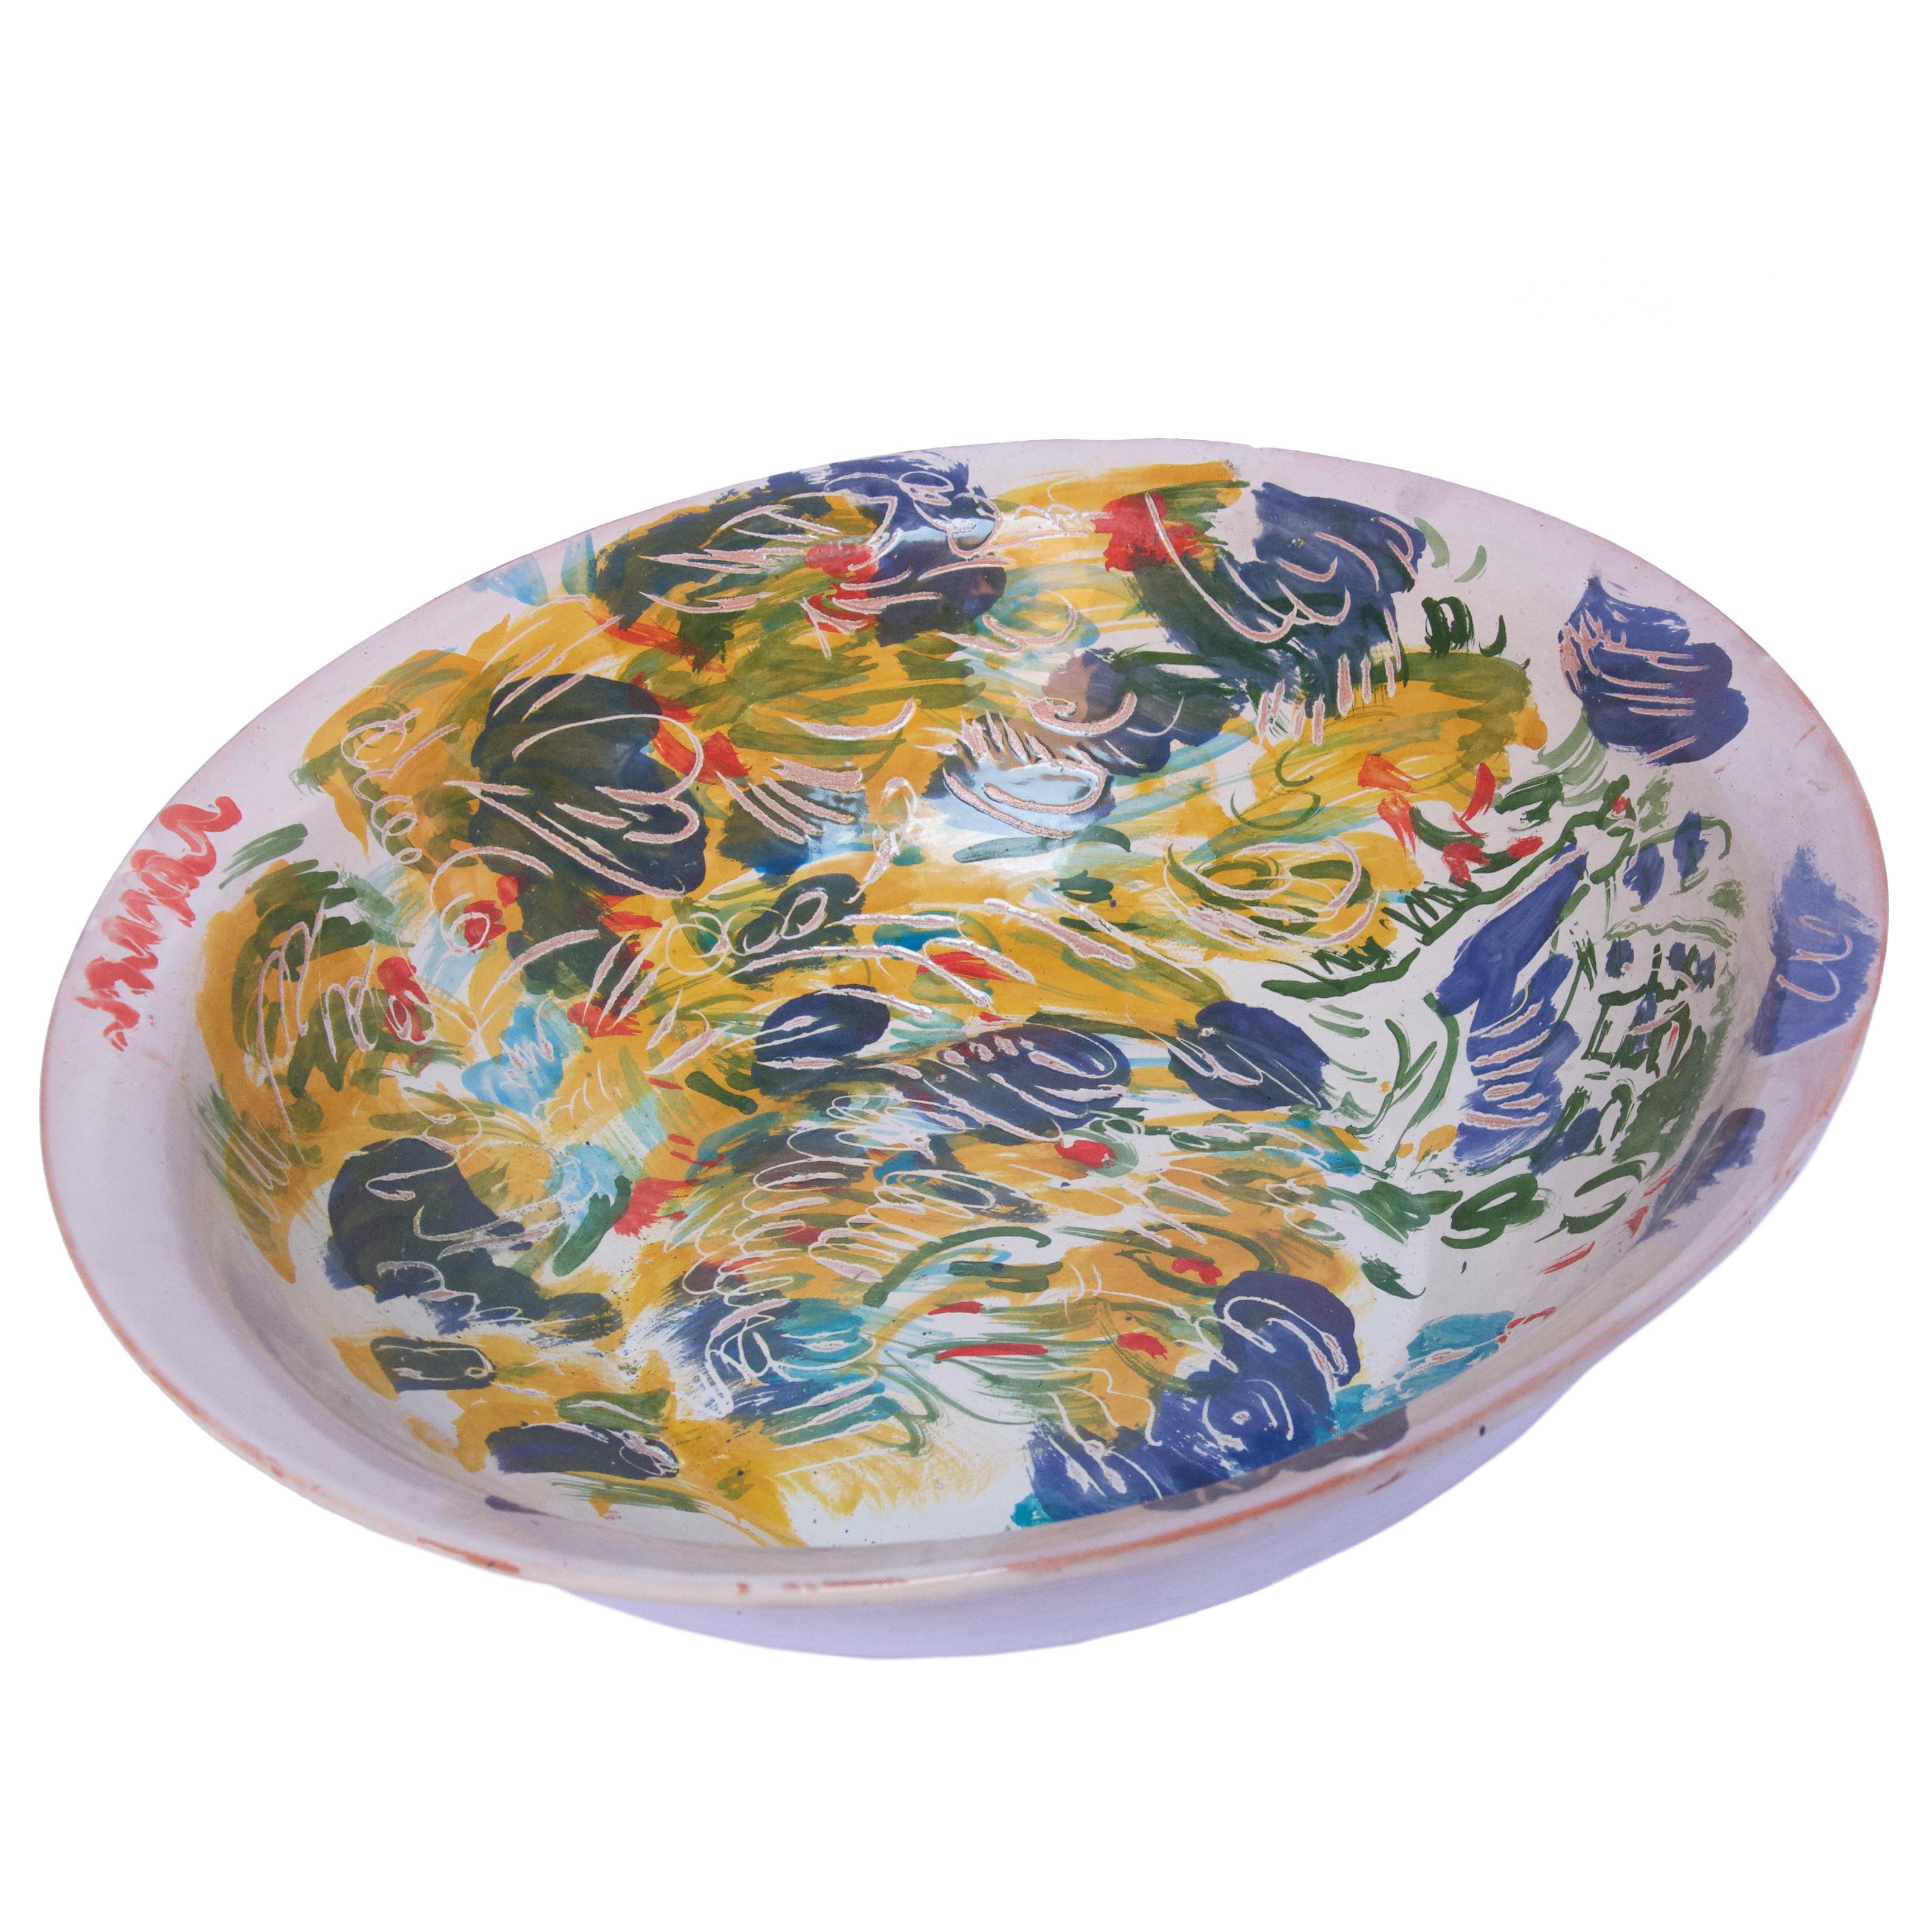 Majolica Colorful Ceramic Bowl Mid-Century Modern Mexican Signed on the Bottom  In New Condition For Sale In Queretaro, Queretaro